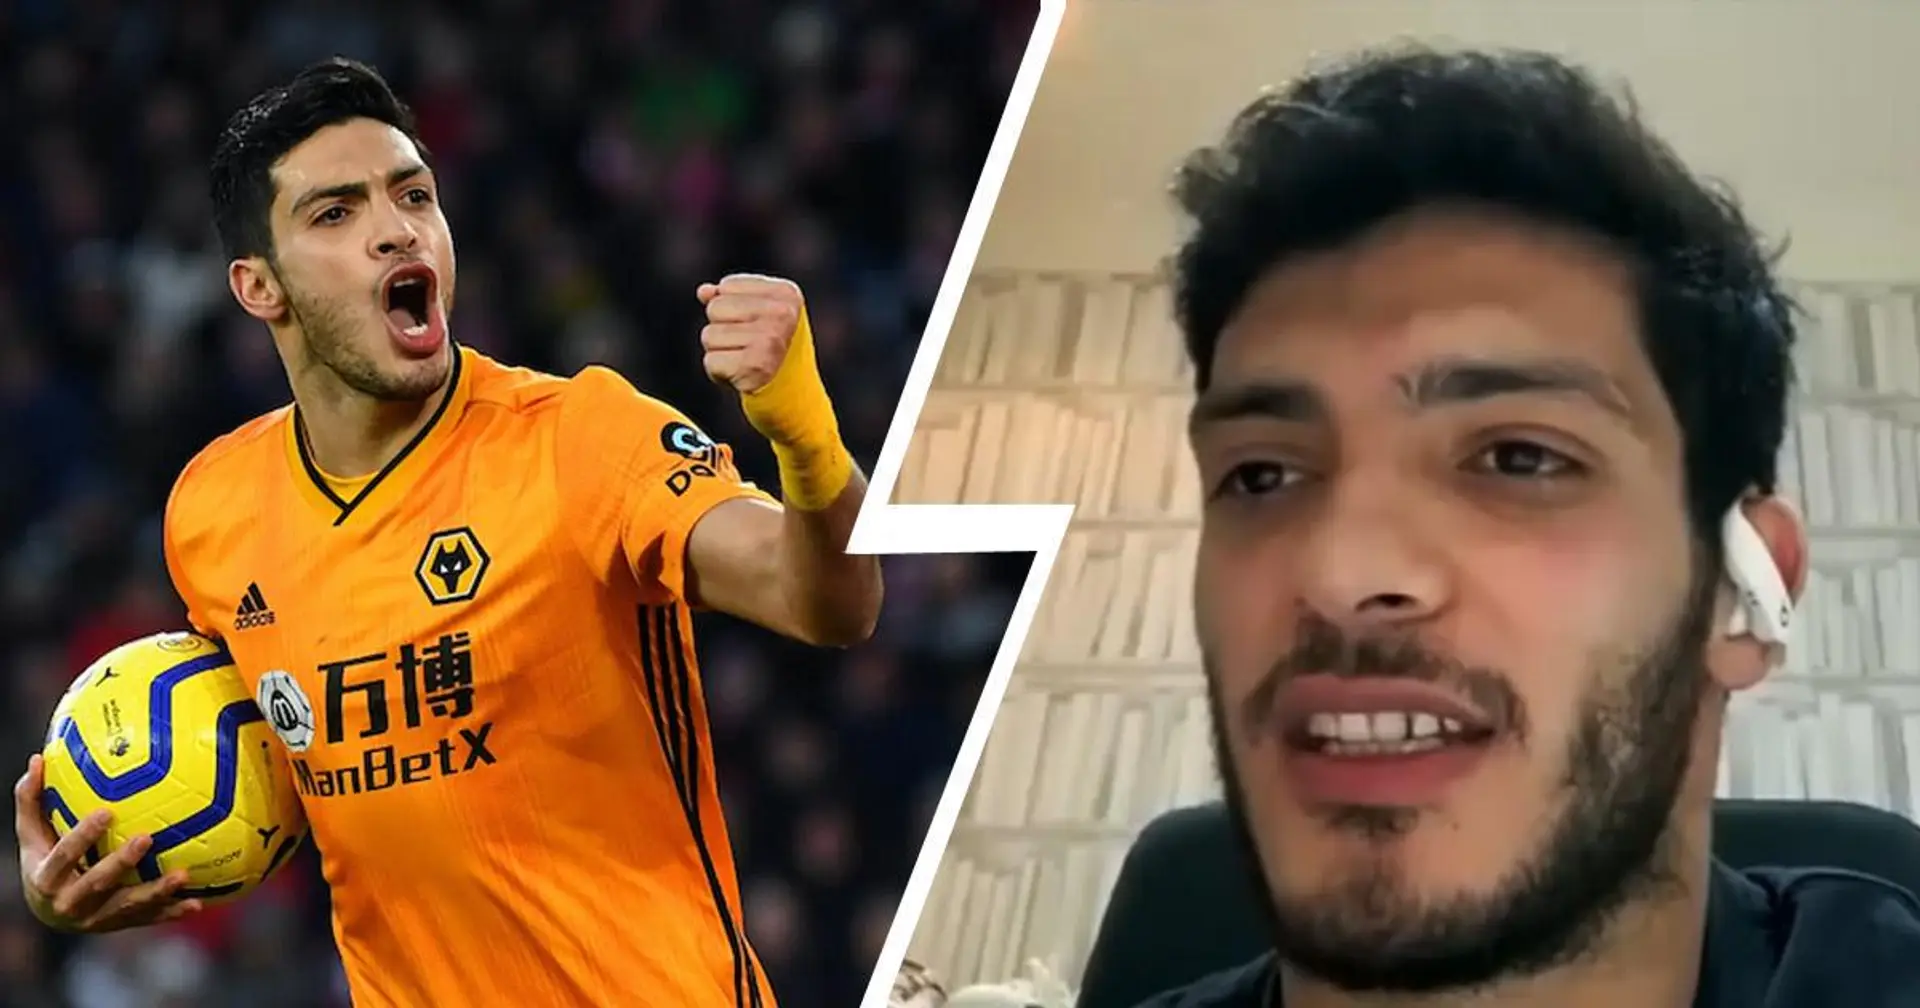 'Every day comes out a new team that want me': Arsenal-linked striker Raul Jimenez gives update on his future